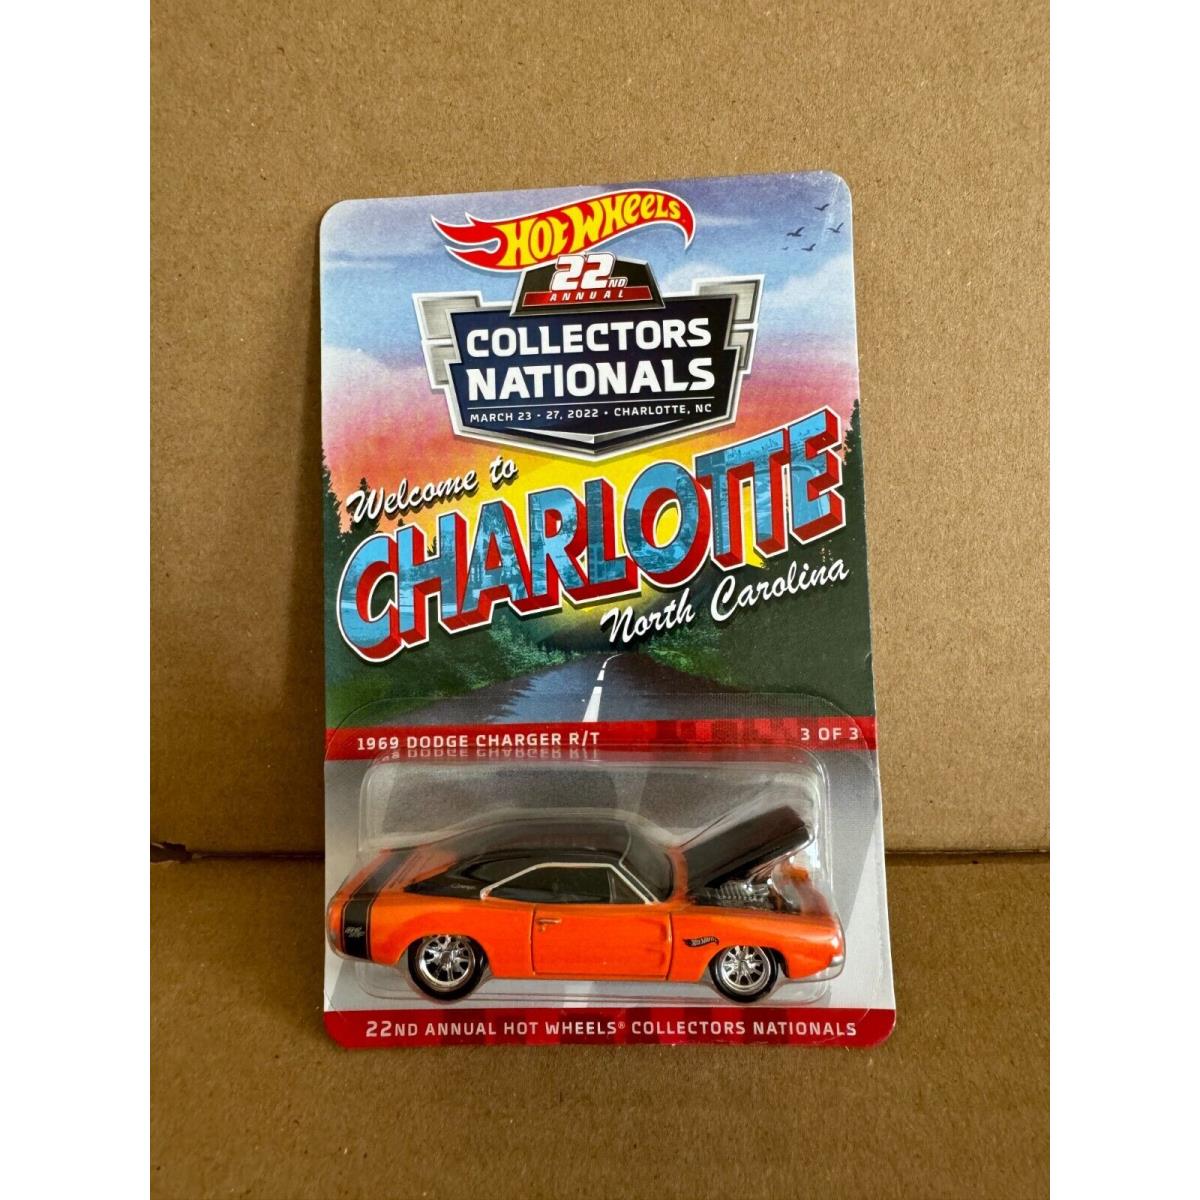 Hot Wheels 22nd Annual Collectors Nationals 1969 Dodge Charger R/t A1